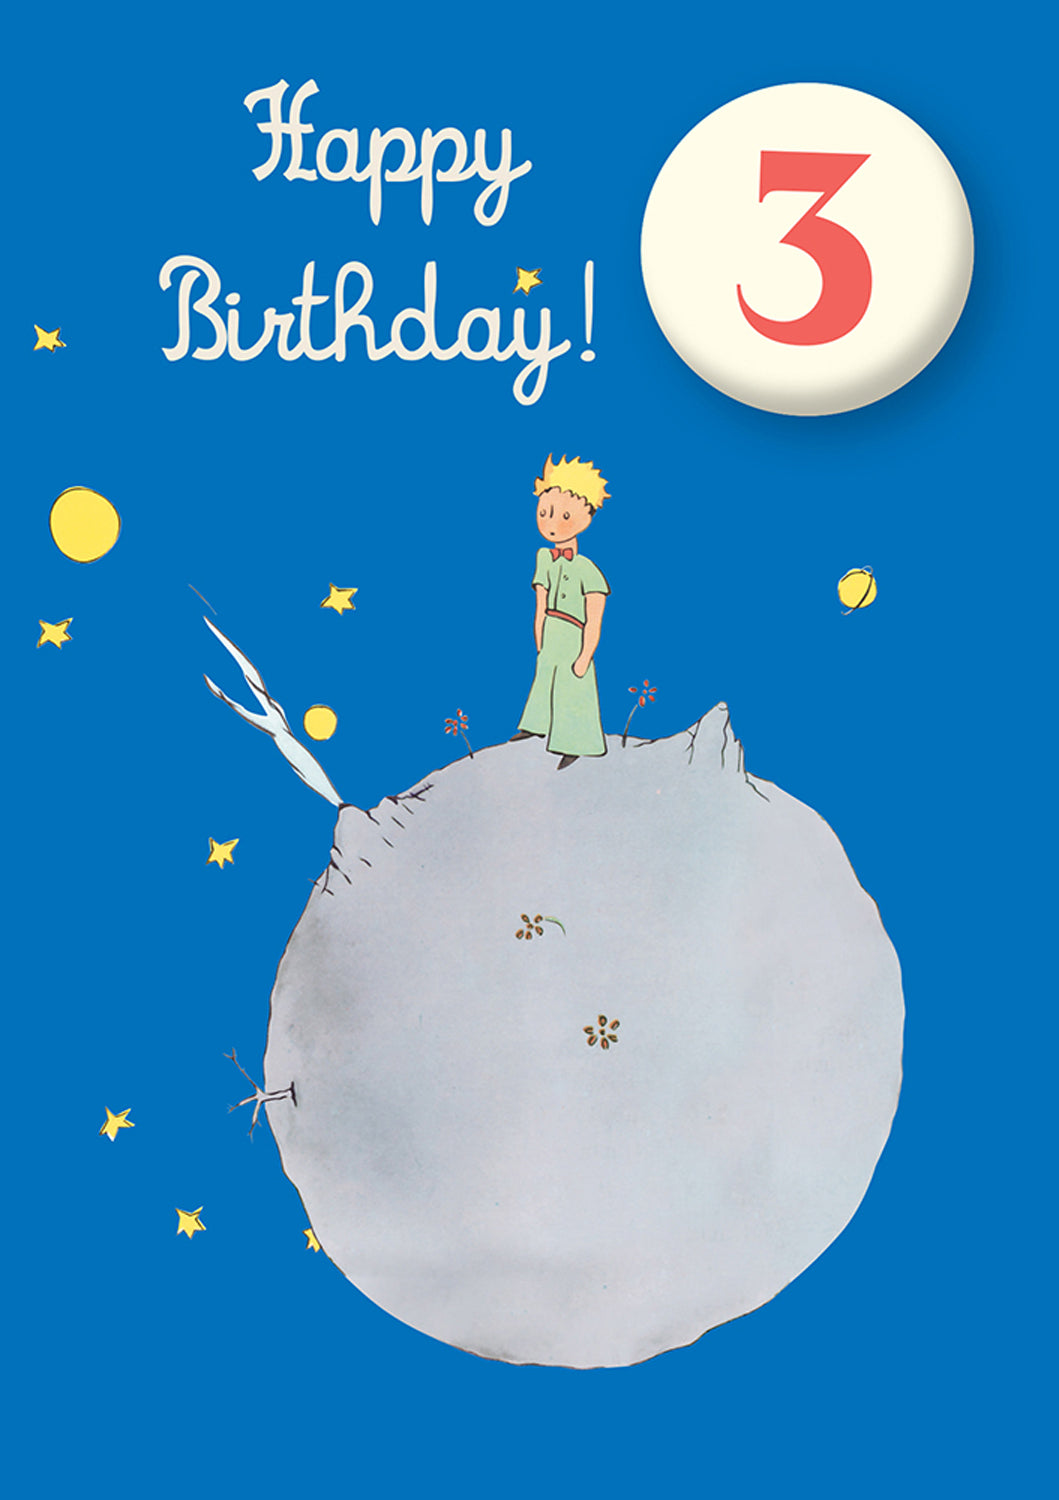 Greeting Card: The Little Prince - Happy Birthday Age 3 Badge